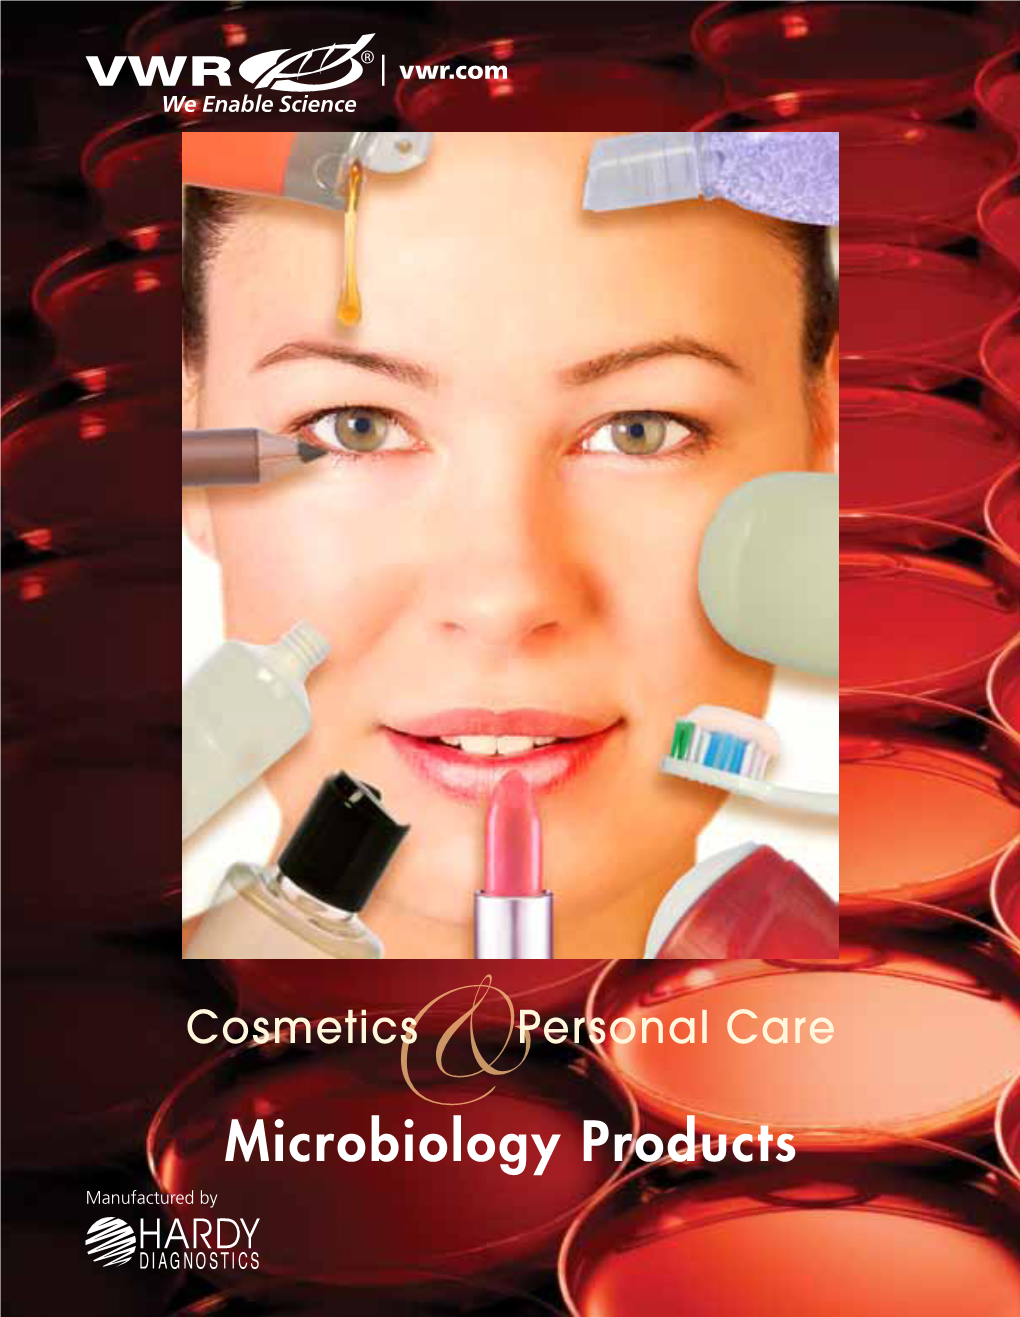 Microbiology Products Manufactured By